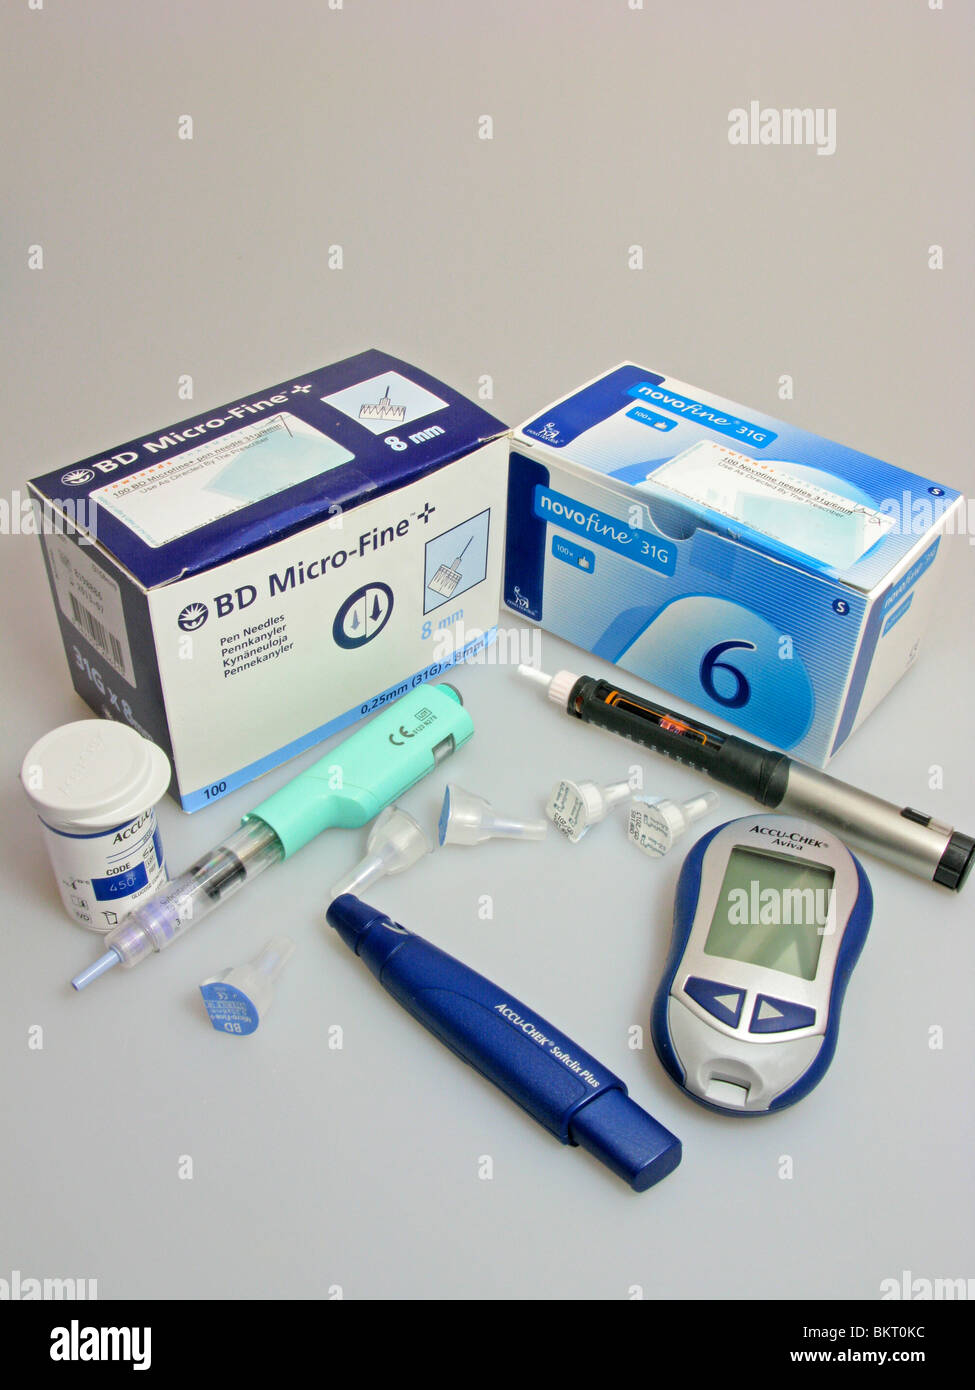 blood sugars (glucose) monitor & injection items needed for a someone suffering from diabetes Stock Photo